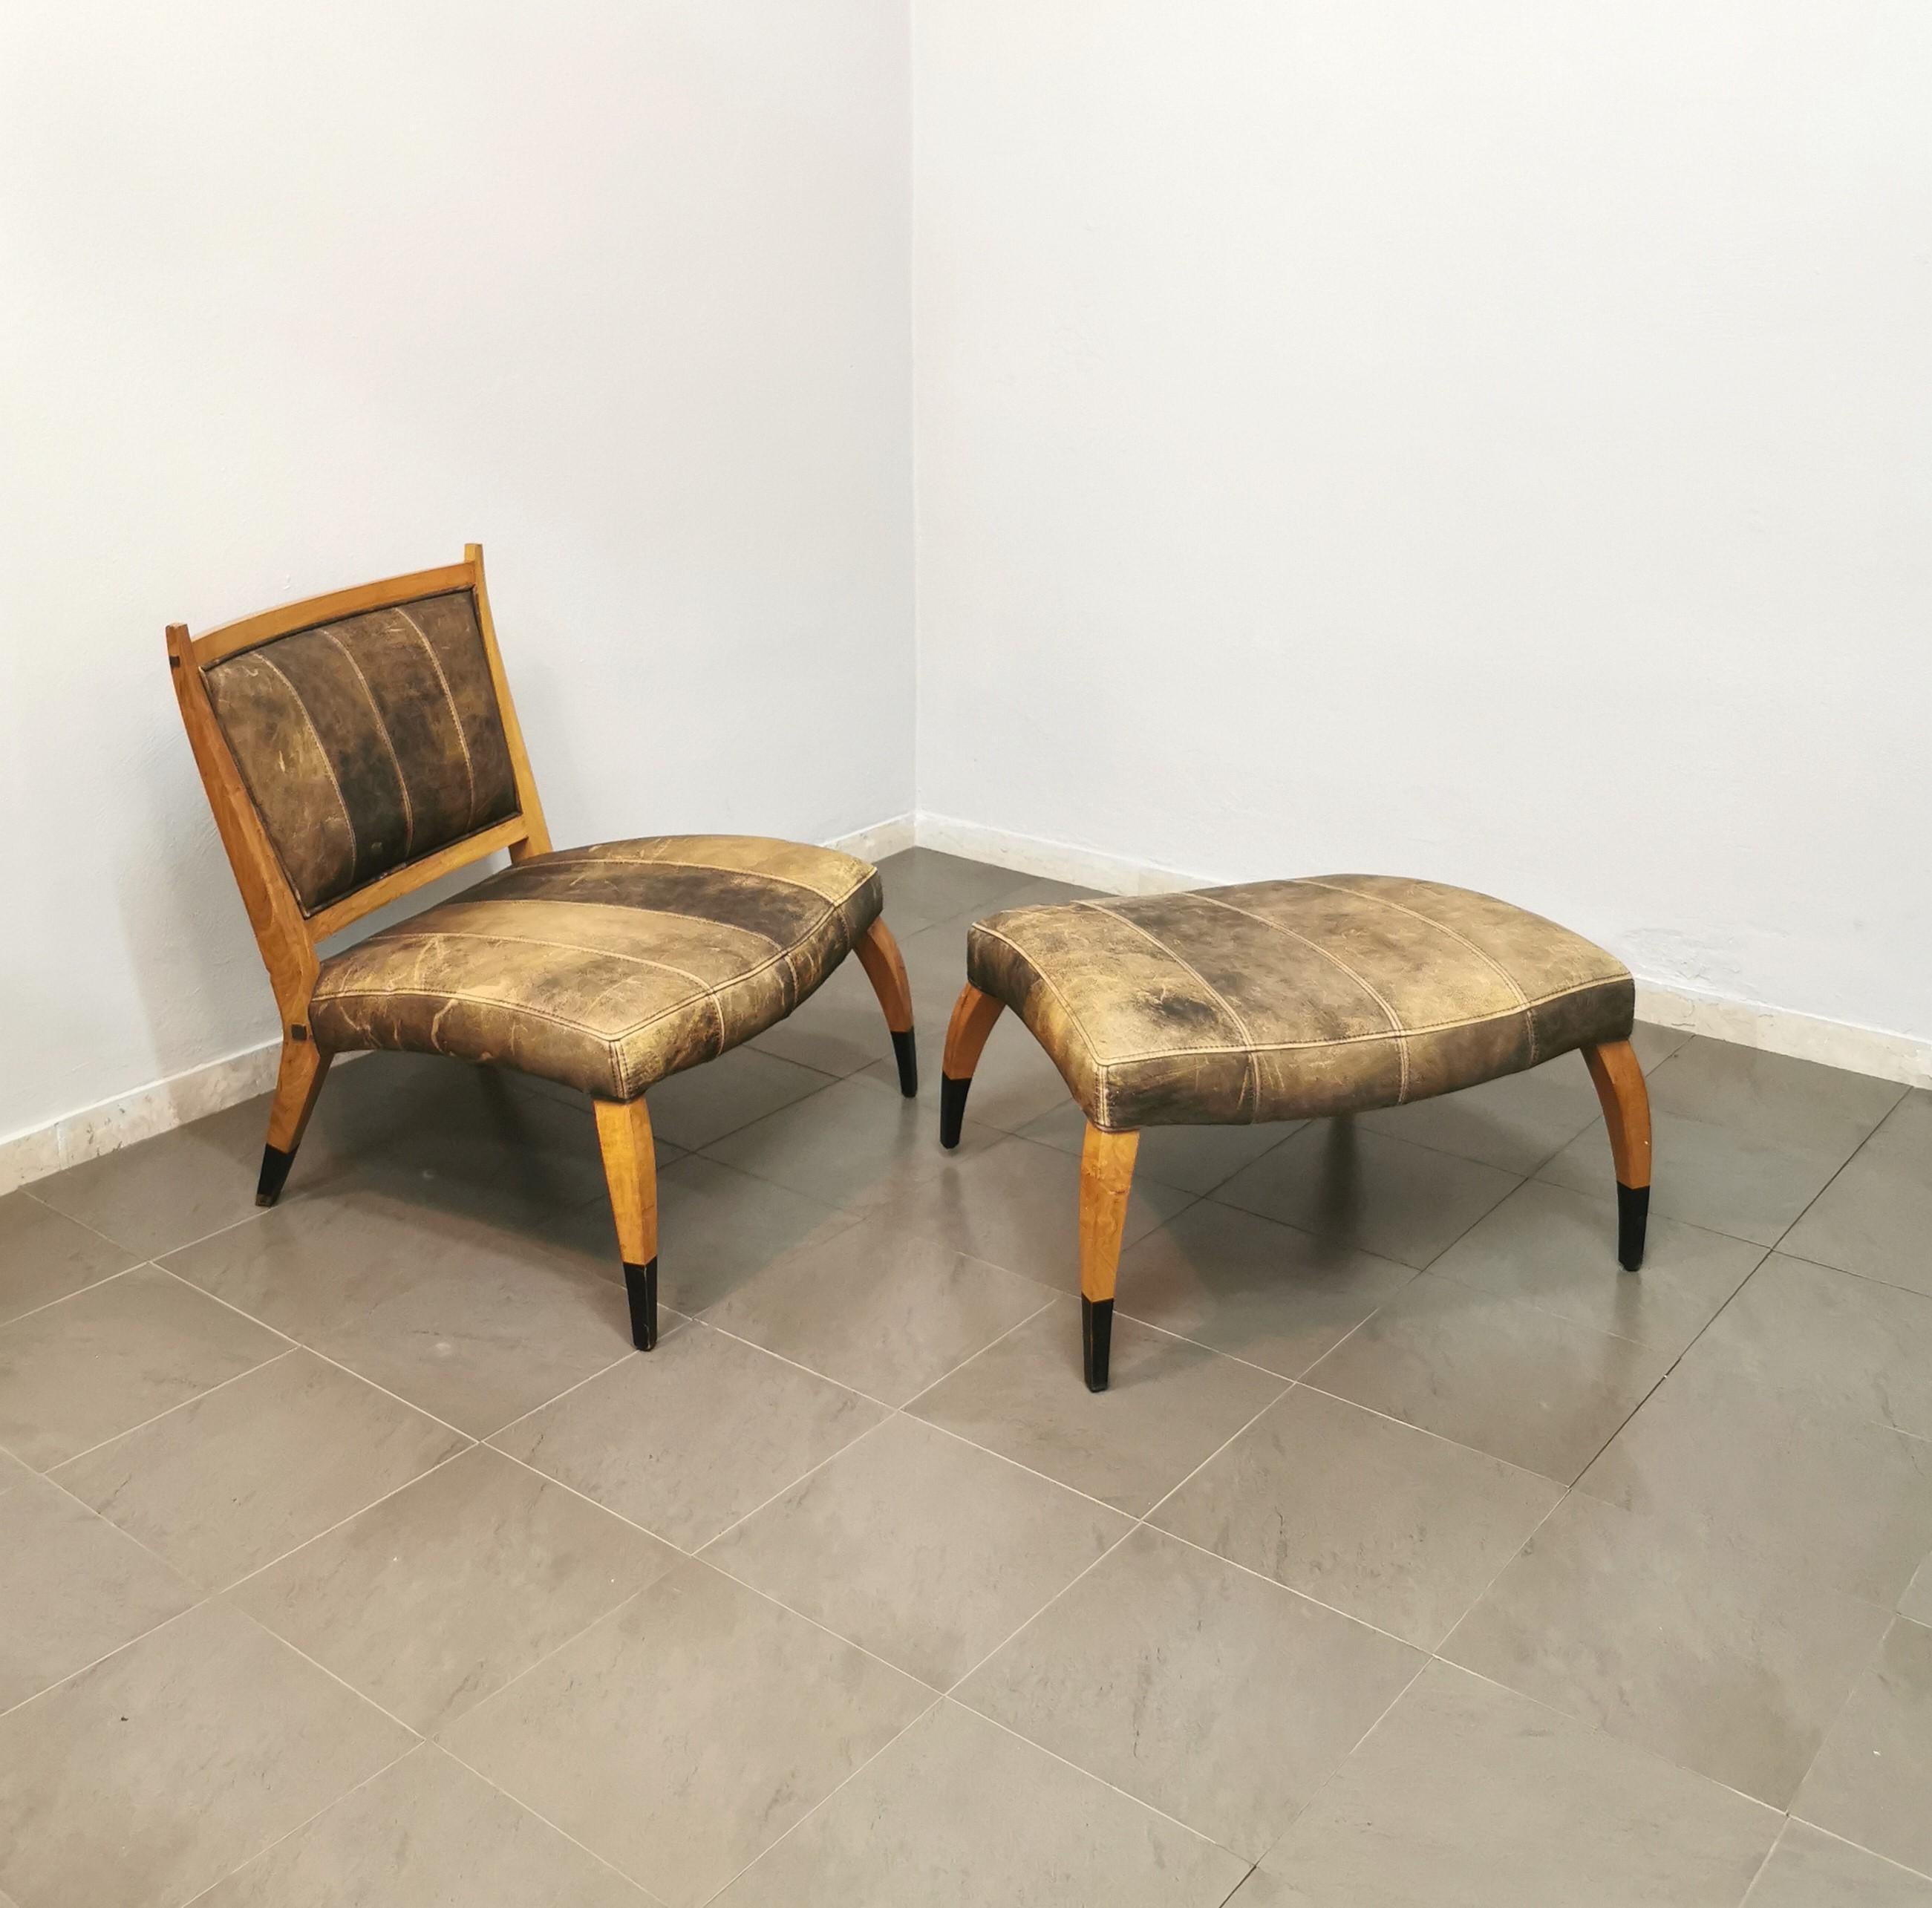 20th Century Midcentury Armchair Footstool Aged Leather Wood Curved Brown Black 1960 Set of 2